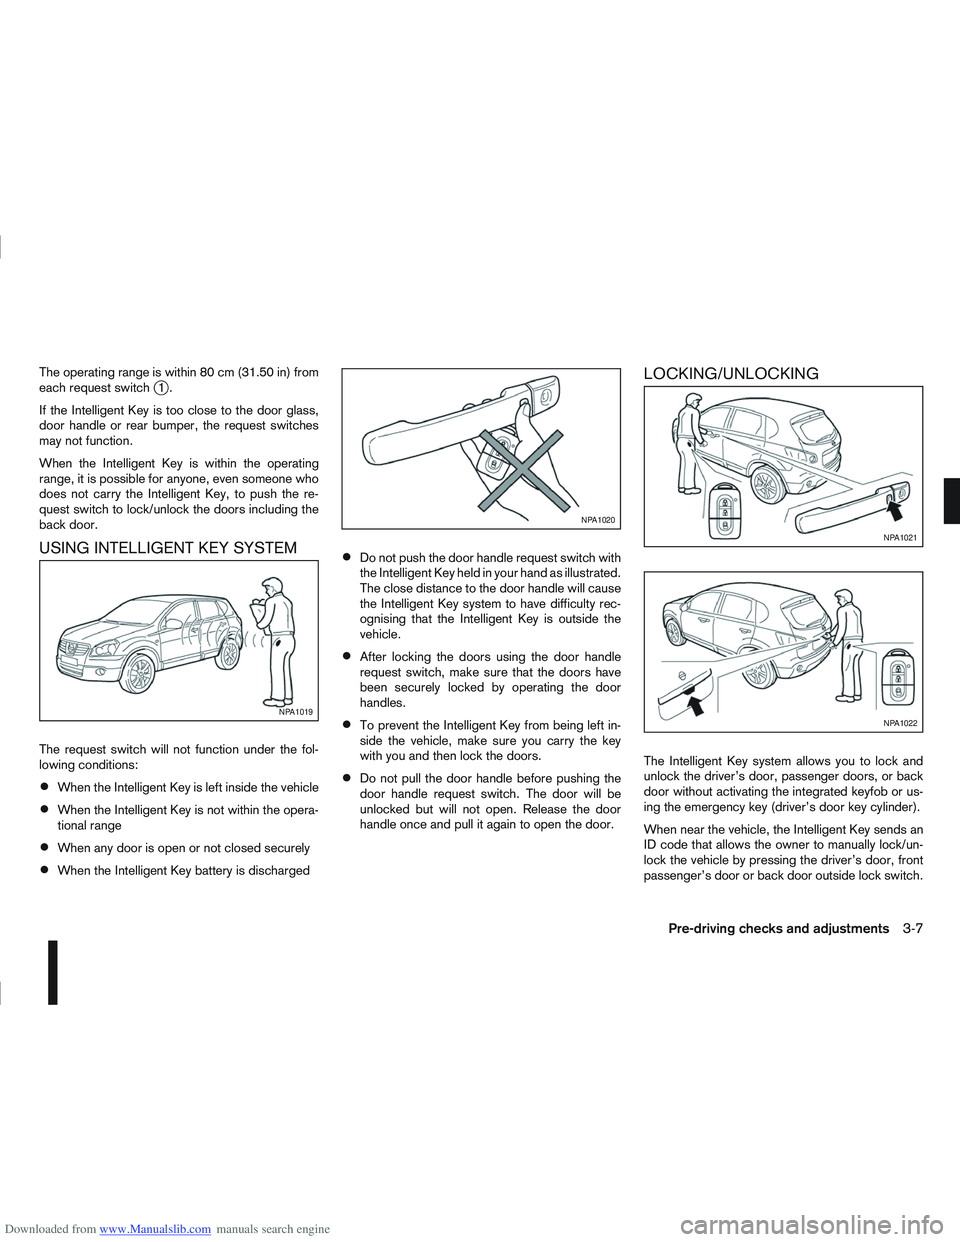 NISSAN QASHQAI 2013  Owners Manual Downloaded from www.Manualslib.com manuals search engine The operating range is within 80 cm (31.50 in) from
each request switchj1.
If the Intelligent Key is too close to the door glass,
door handle o